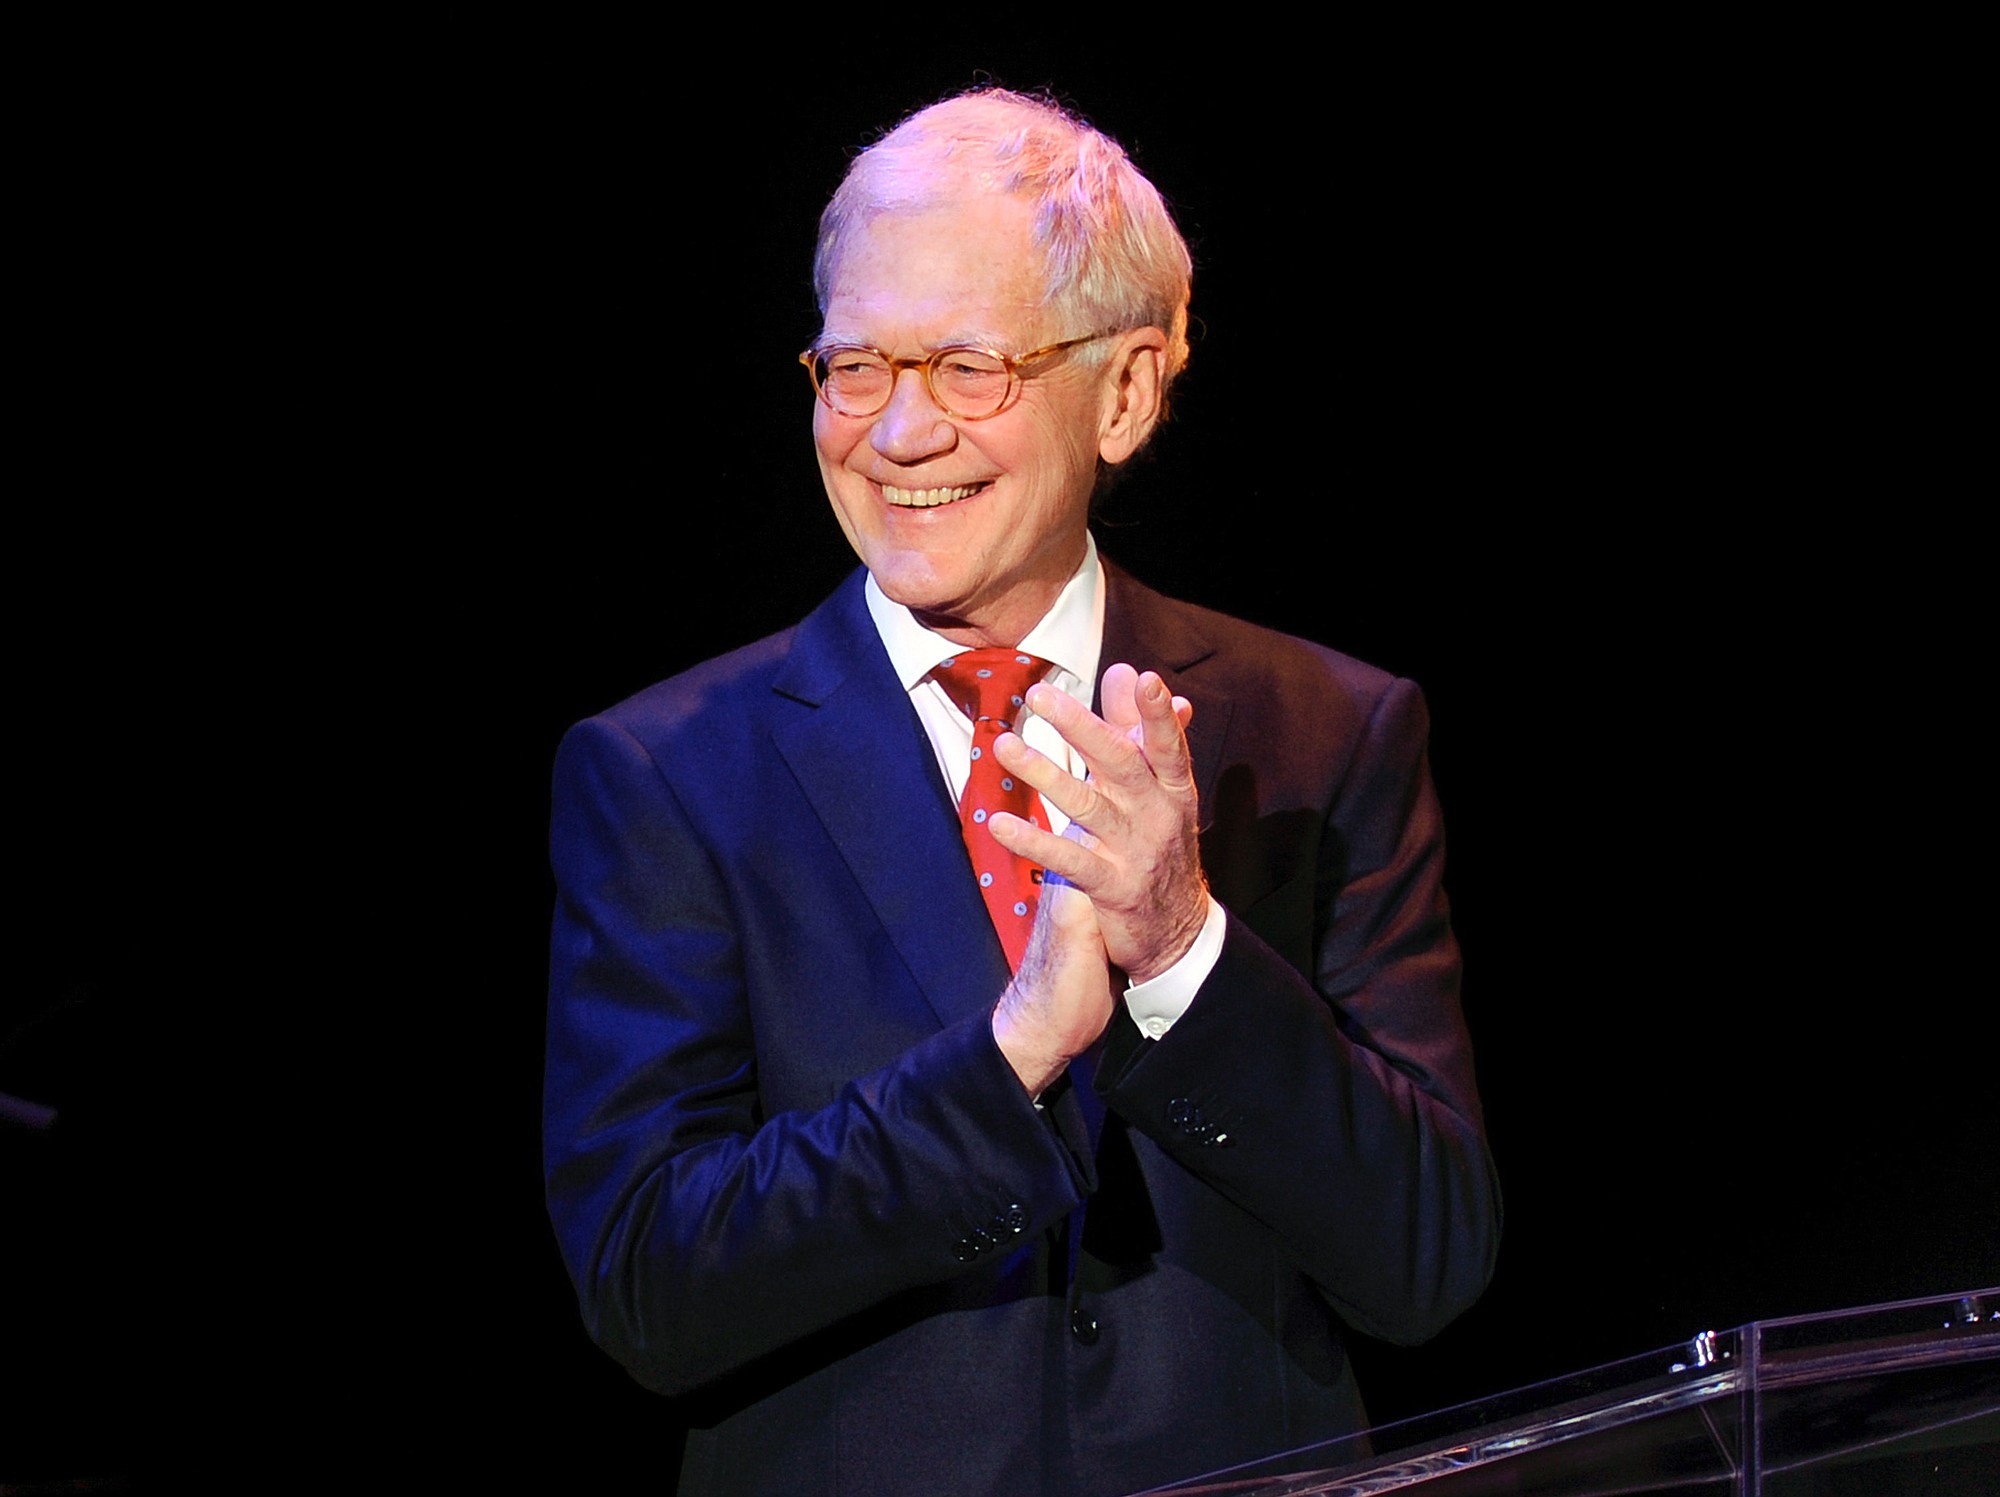 After 33 years hosting late-night talk shows, David Letterman will retire on Wednesday.